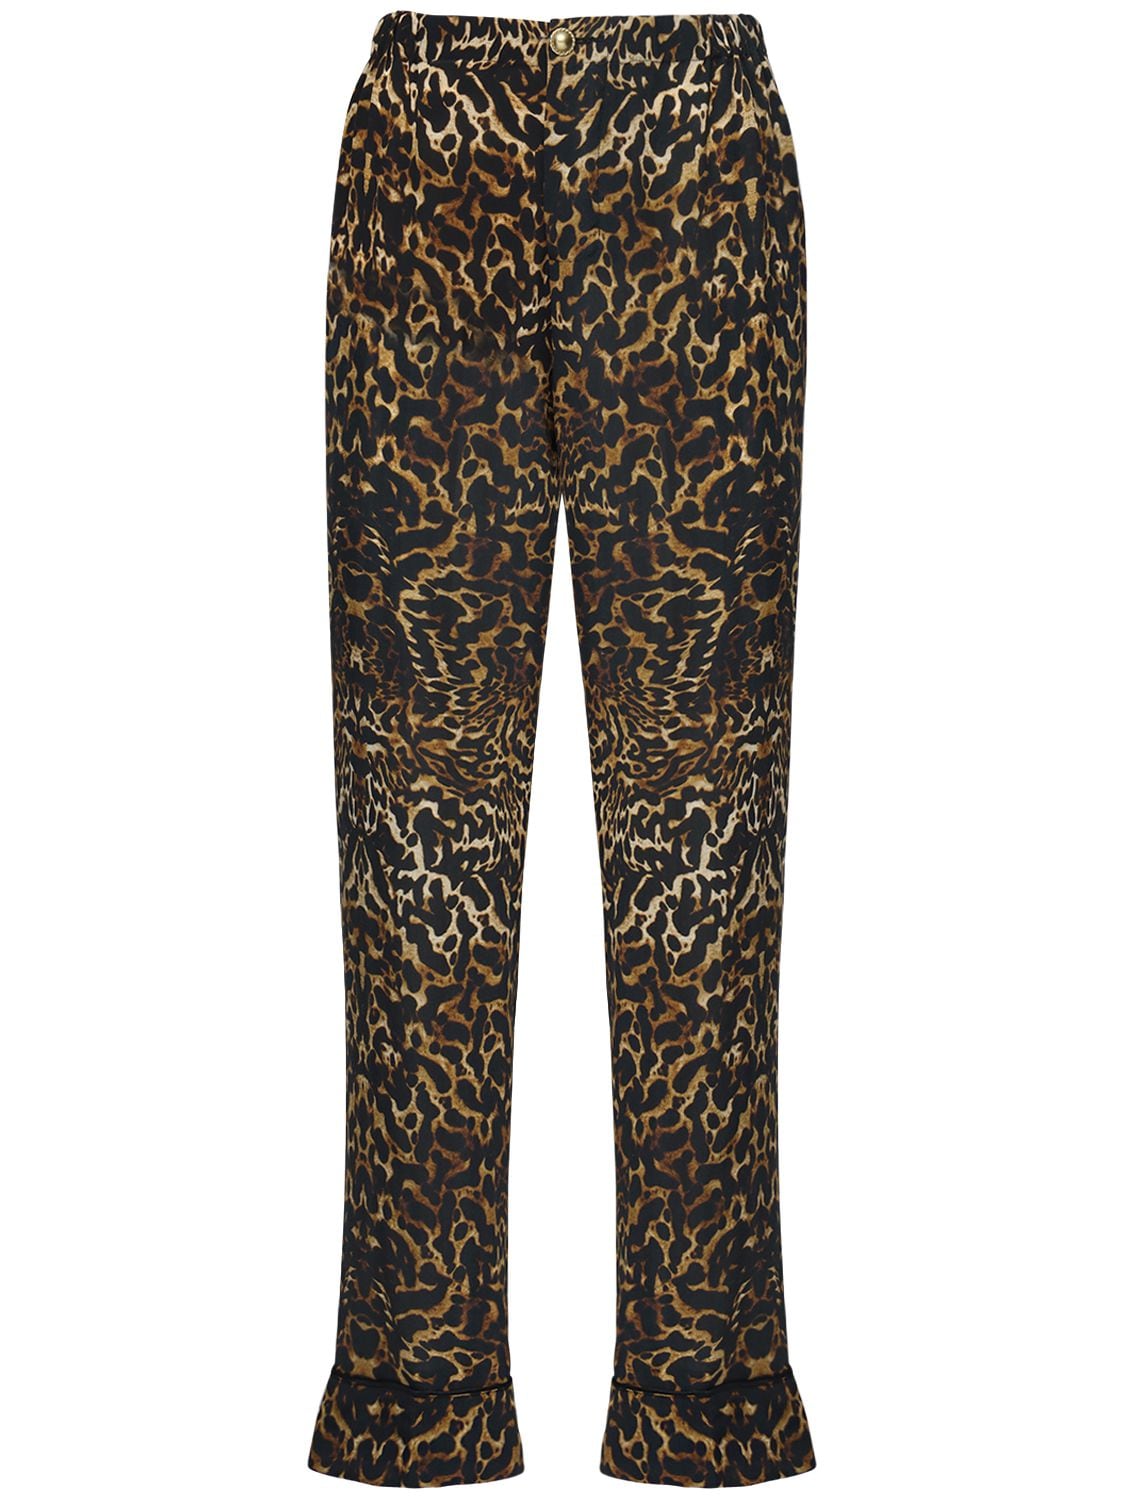 F.R.S. FOR RESTLESS SLEEPERS Leopard Print Silk Crepe Pants